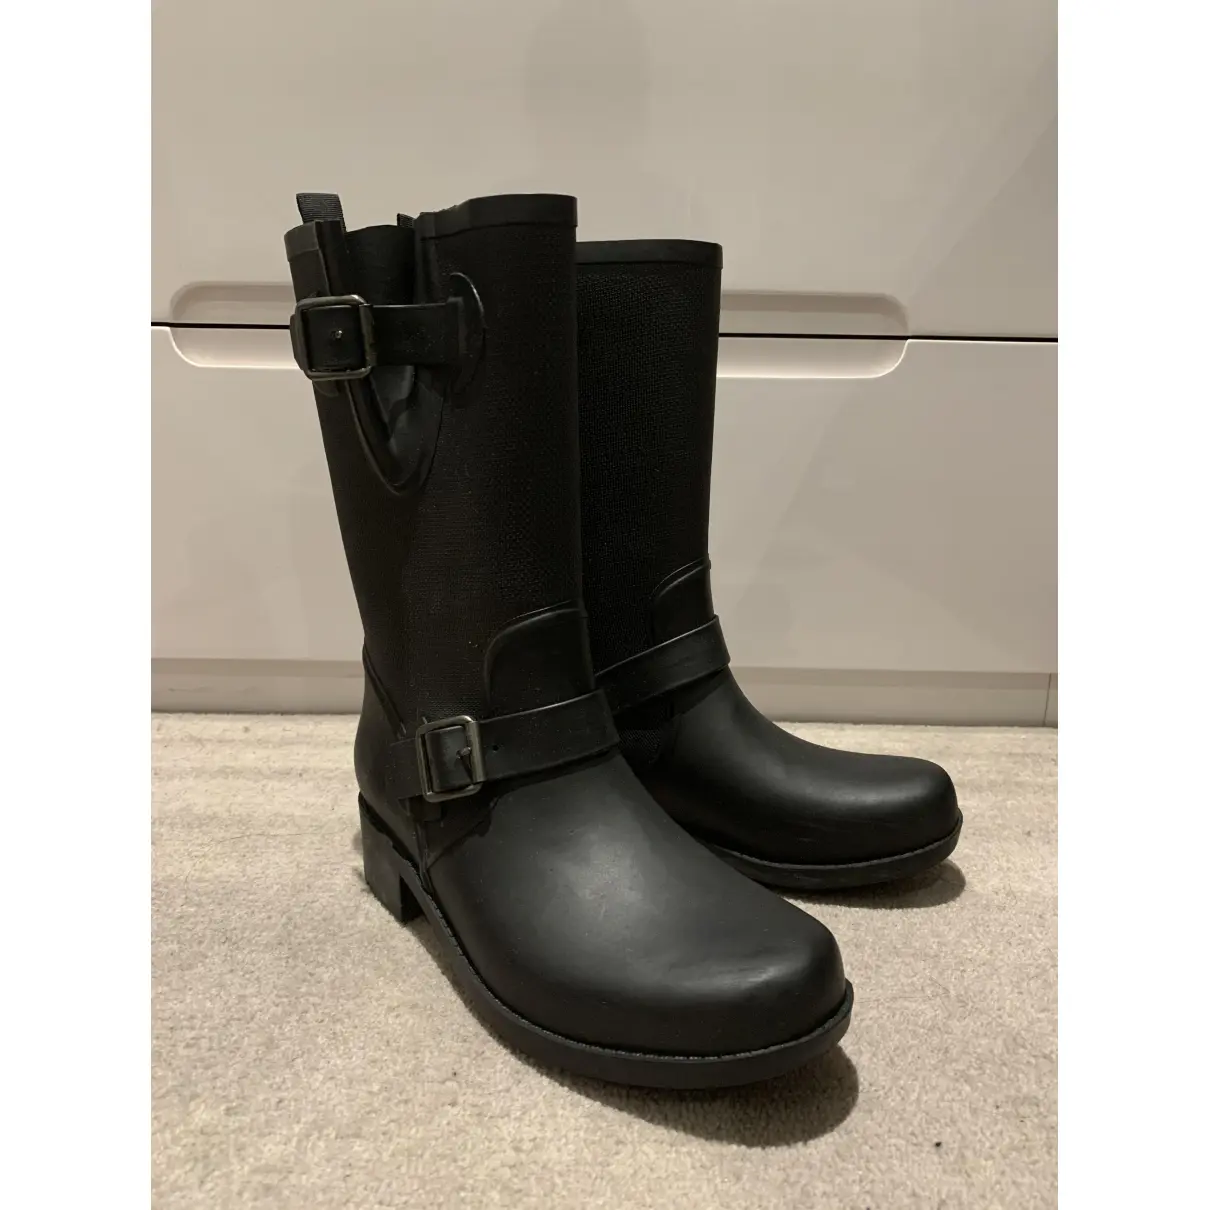 Luxury Kenneth Cole Boots Men